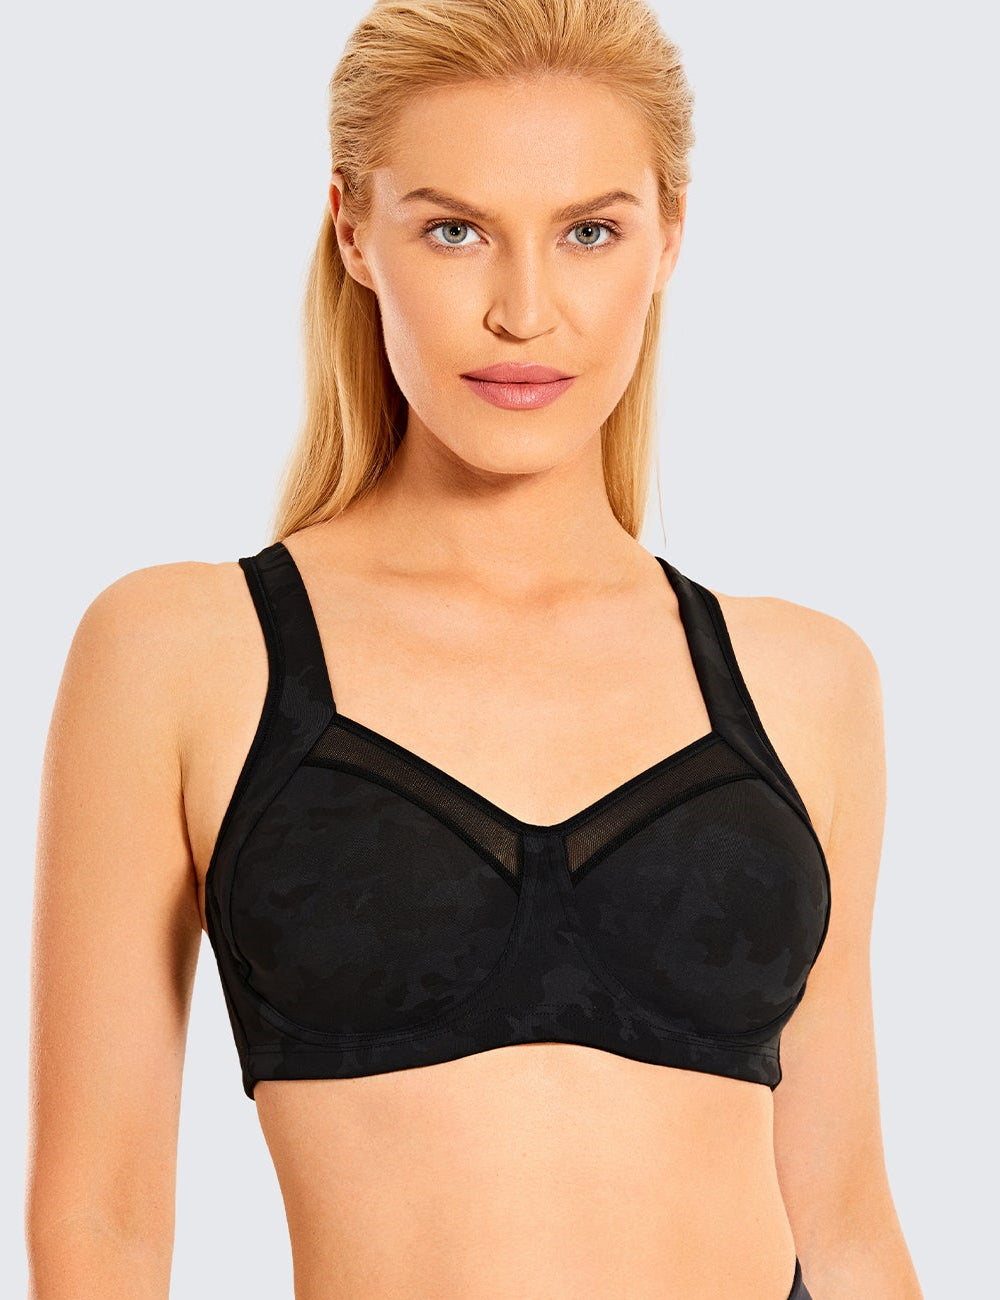 SYROKAN Women's Underwire Firm Support Contour High Impact Sports Bra Navy  38C : : Clothing, Shoes & Accessories